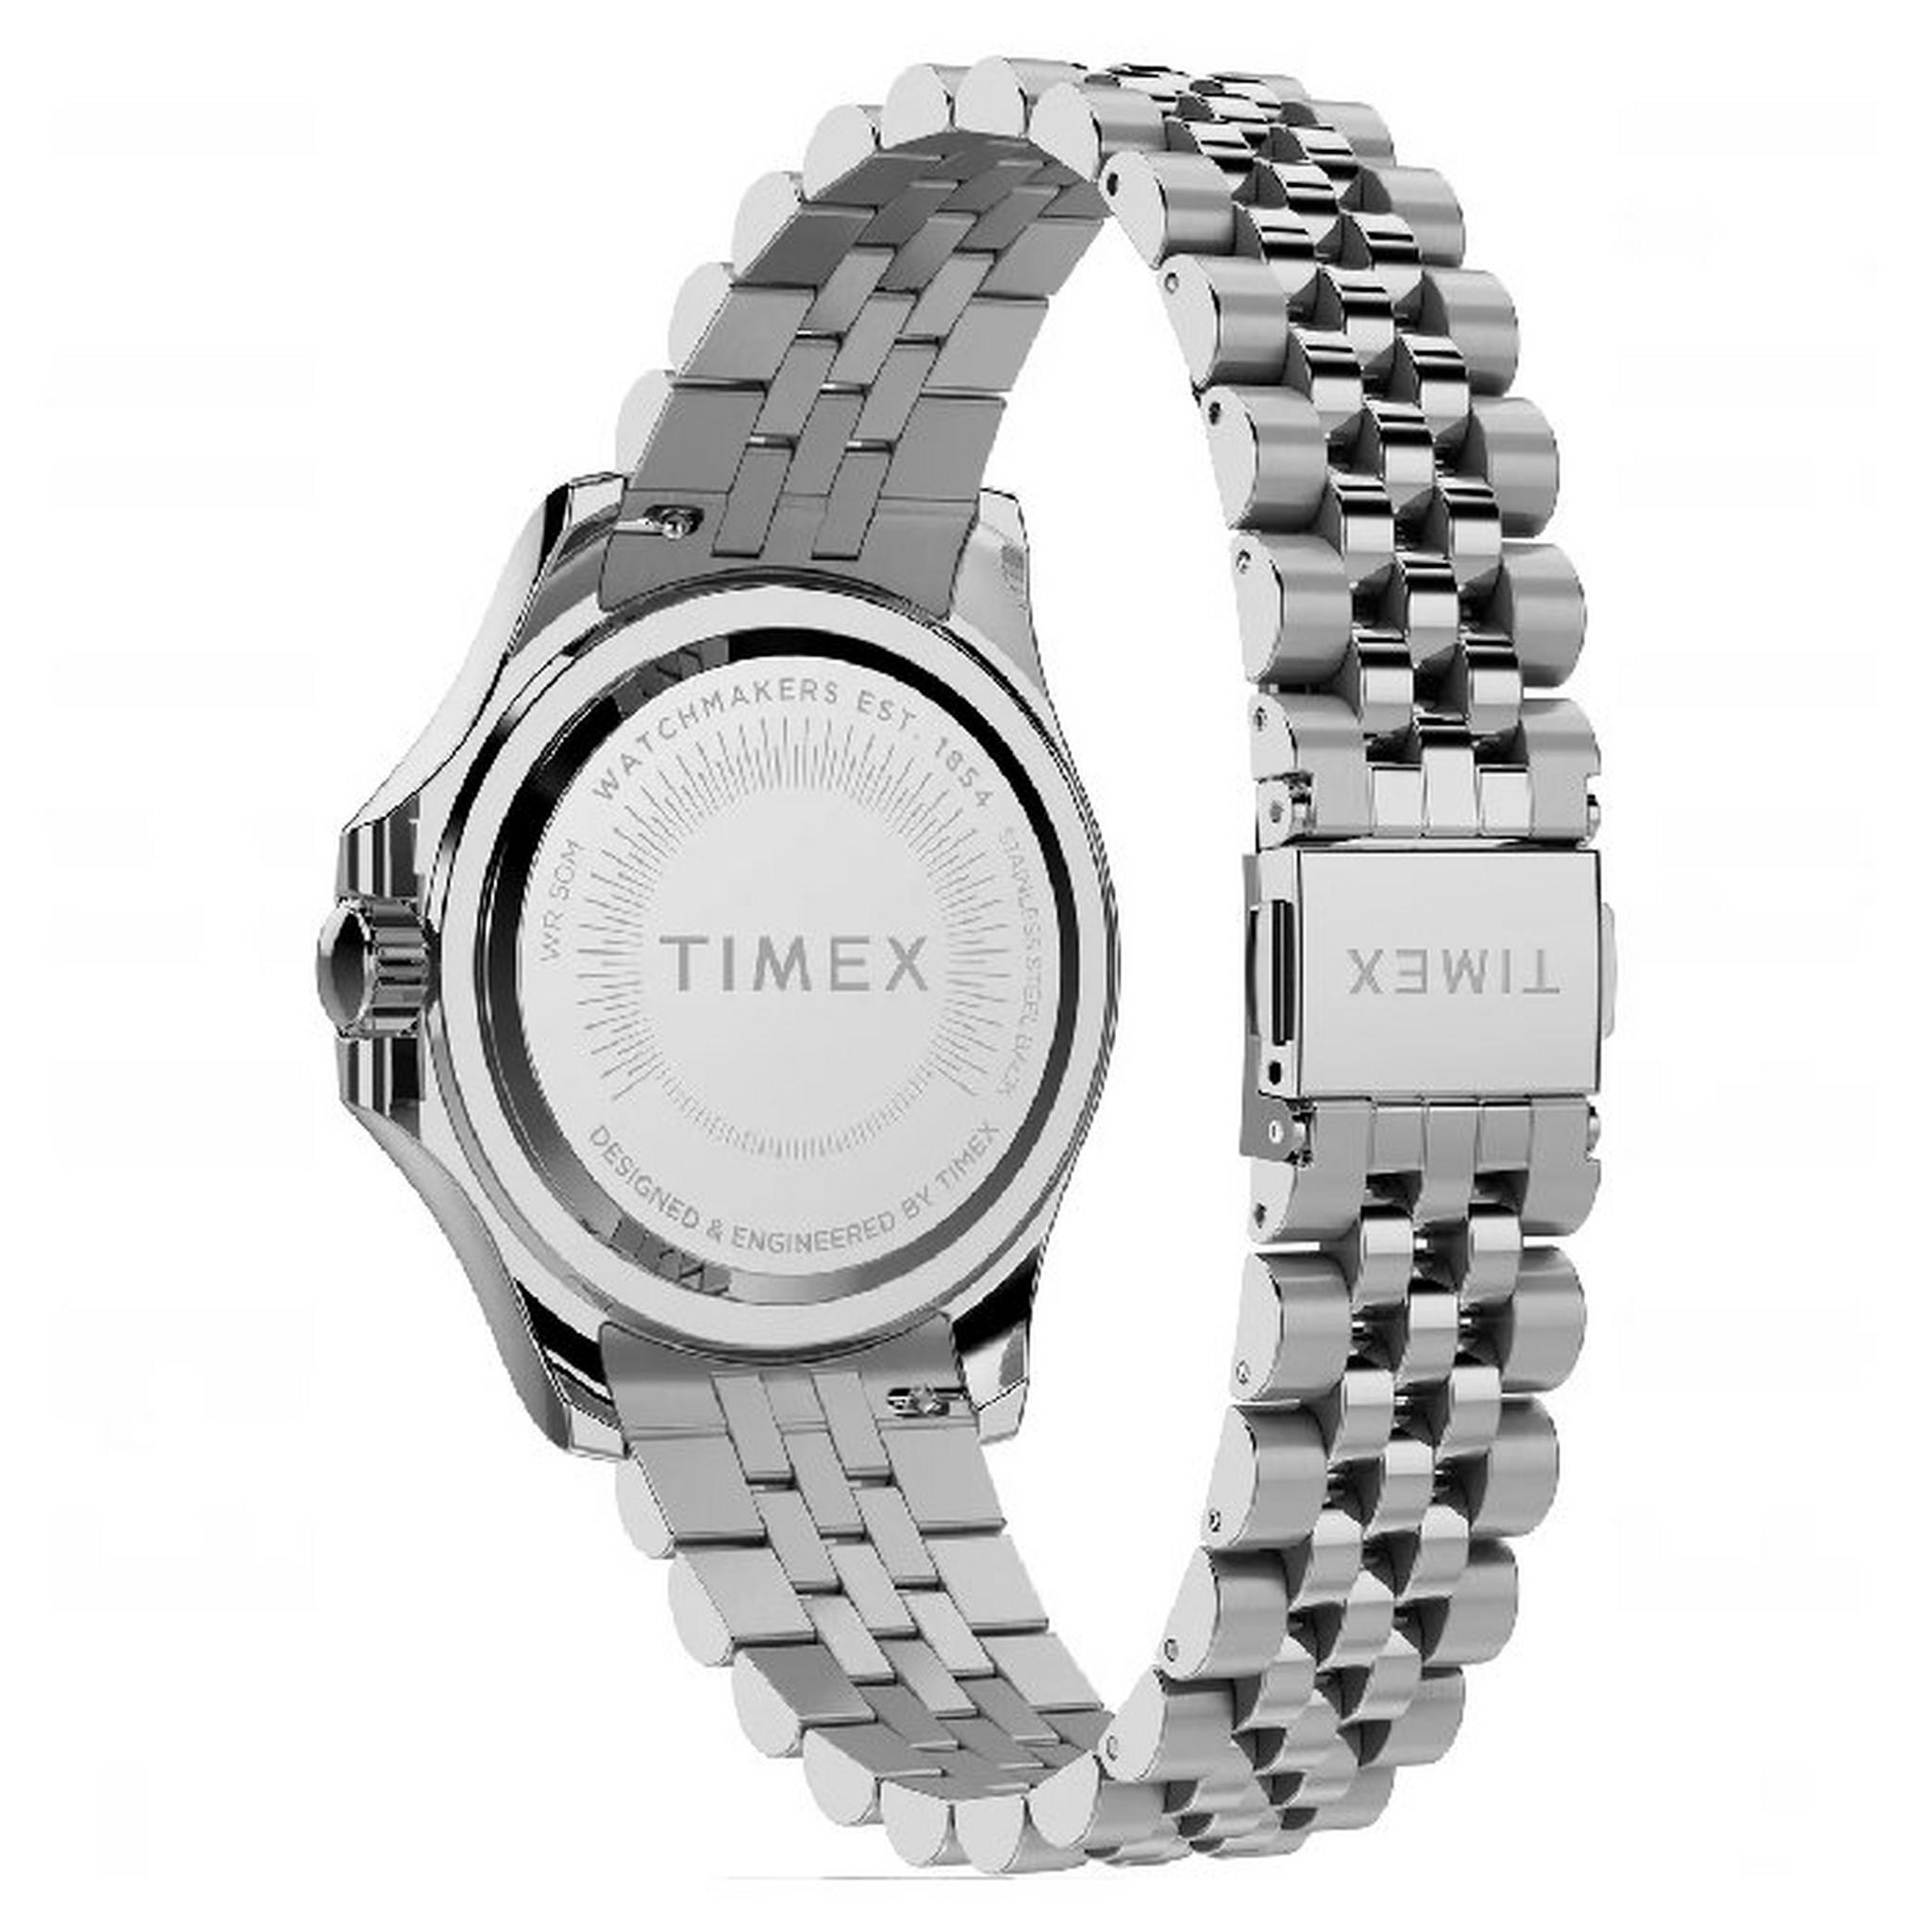 Timex Watch for Women, Analog, Stainless Steel Band, 38mm, TW2V79900 - Silvertone